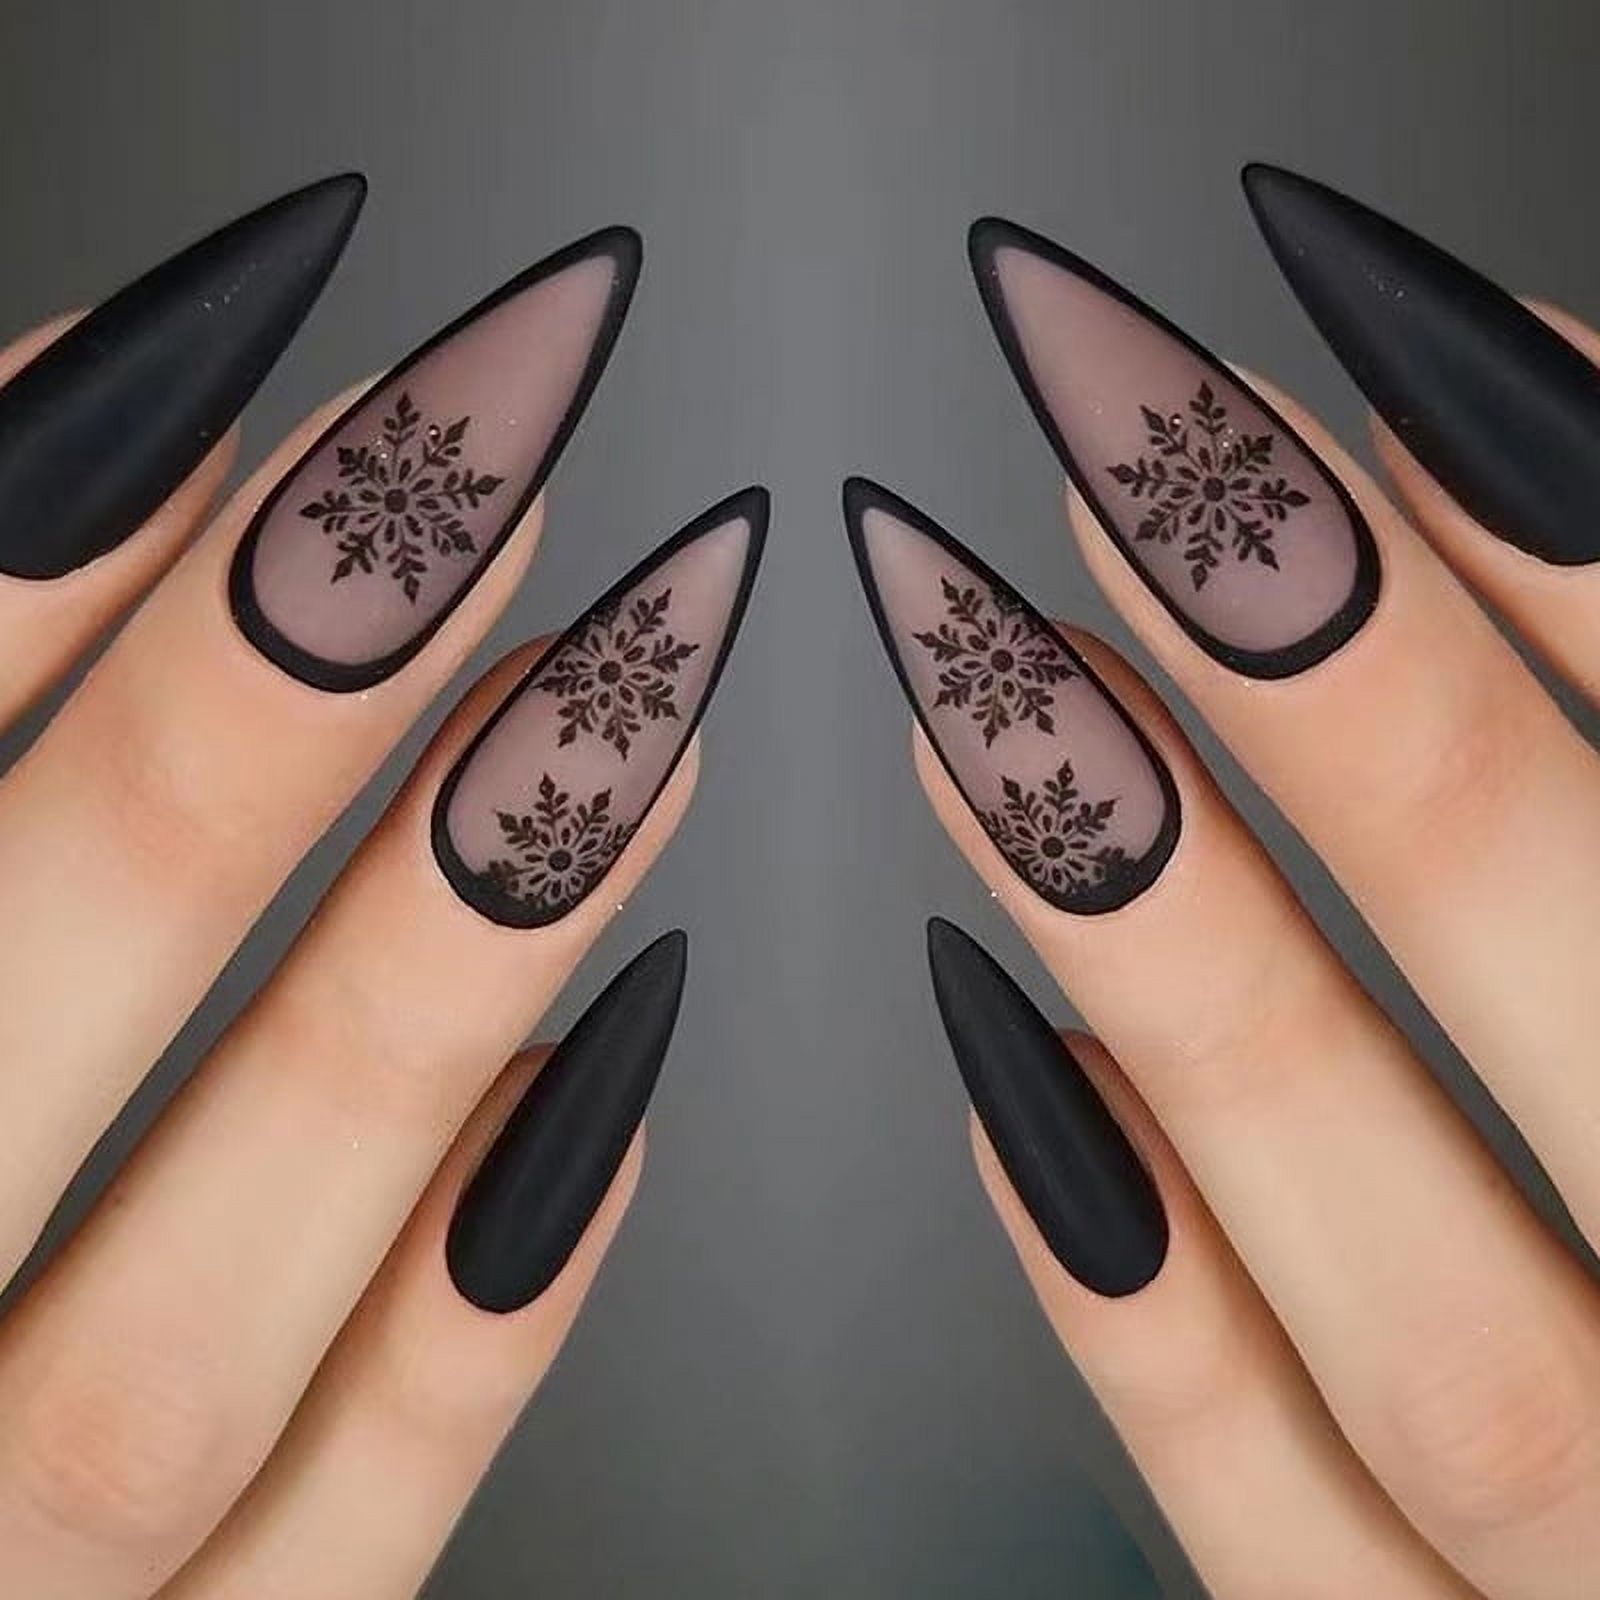 80+ Black Nail Art Stock Photos, Pictures & Royalty-Free Images - iStock